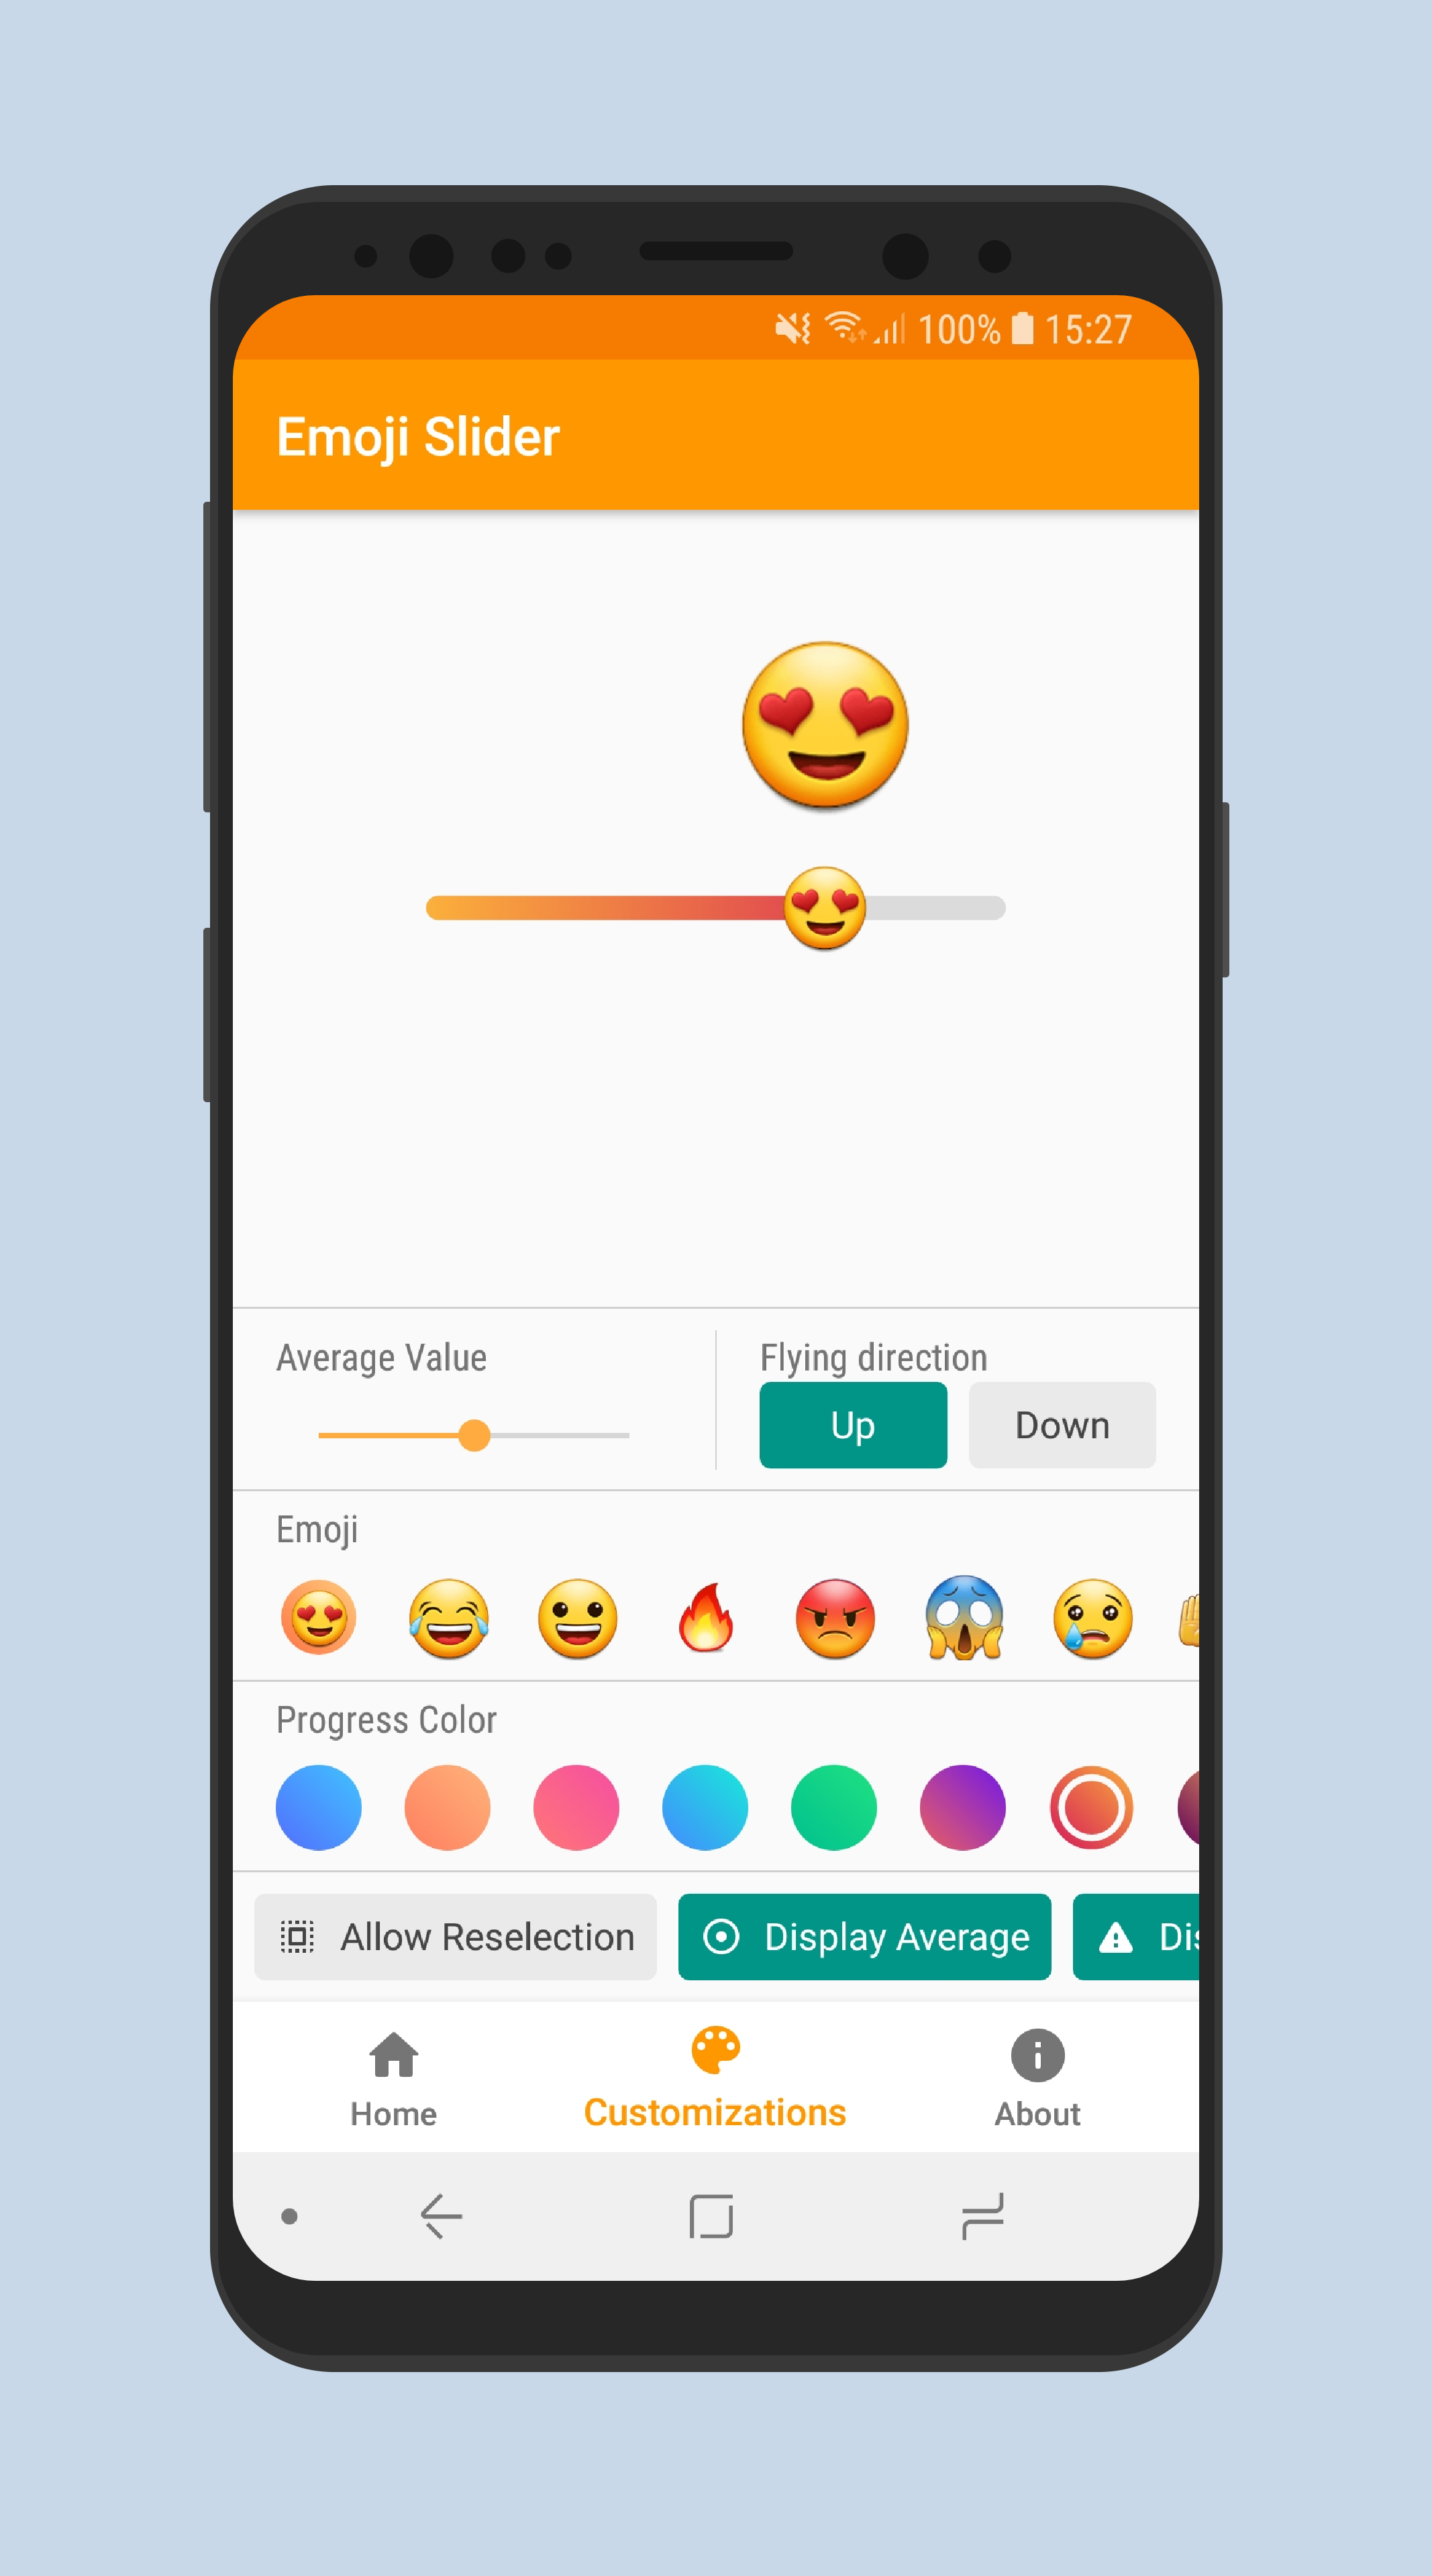 A slider widget rich in emoji and highly customisable